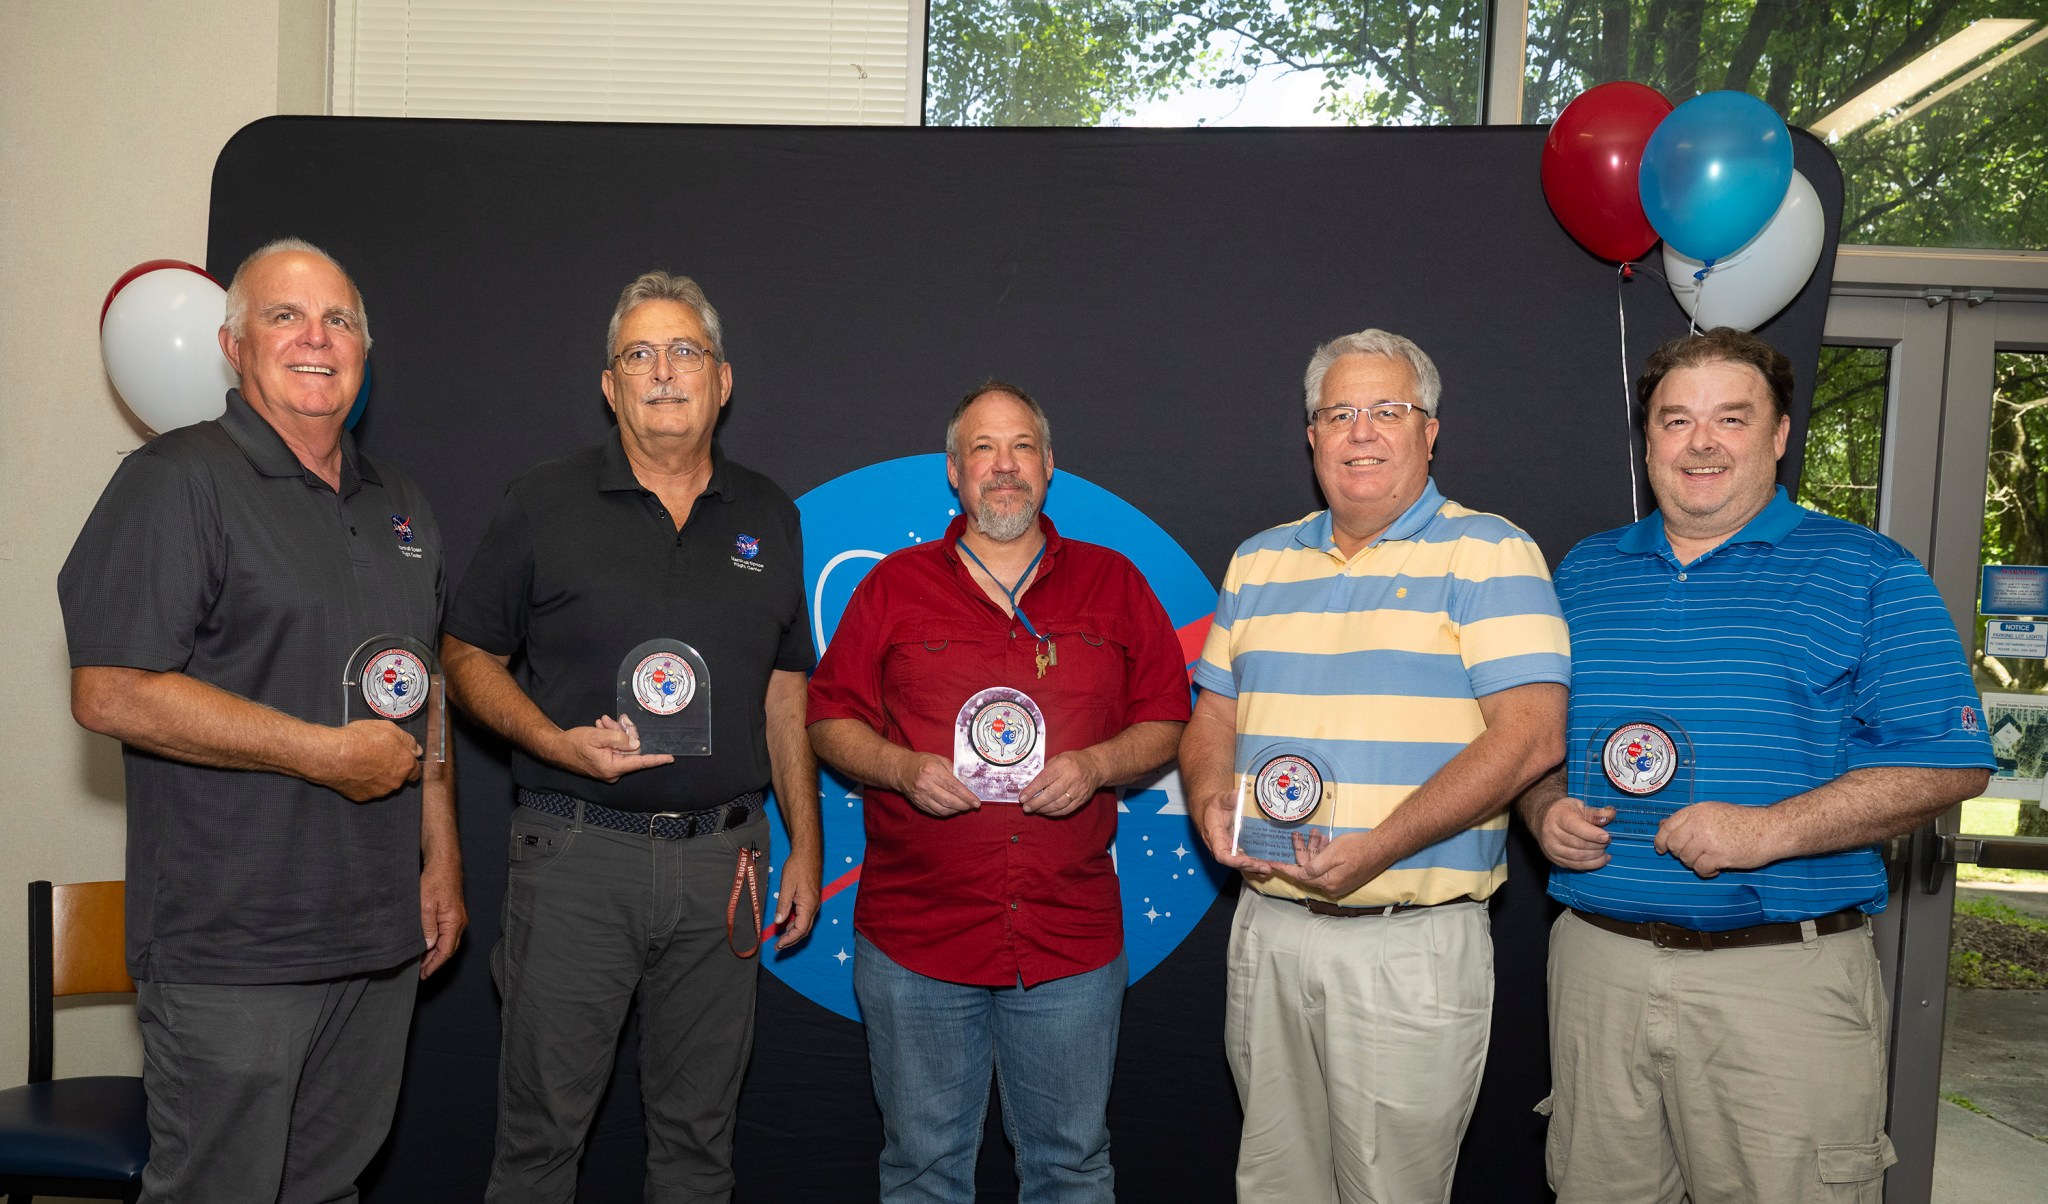 Team members recognized with awards for their 20-year contributions to the Microgravity Science Glovebox.